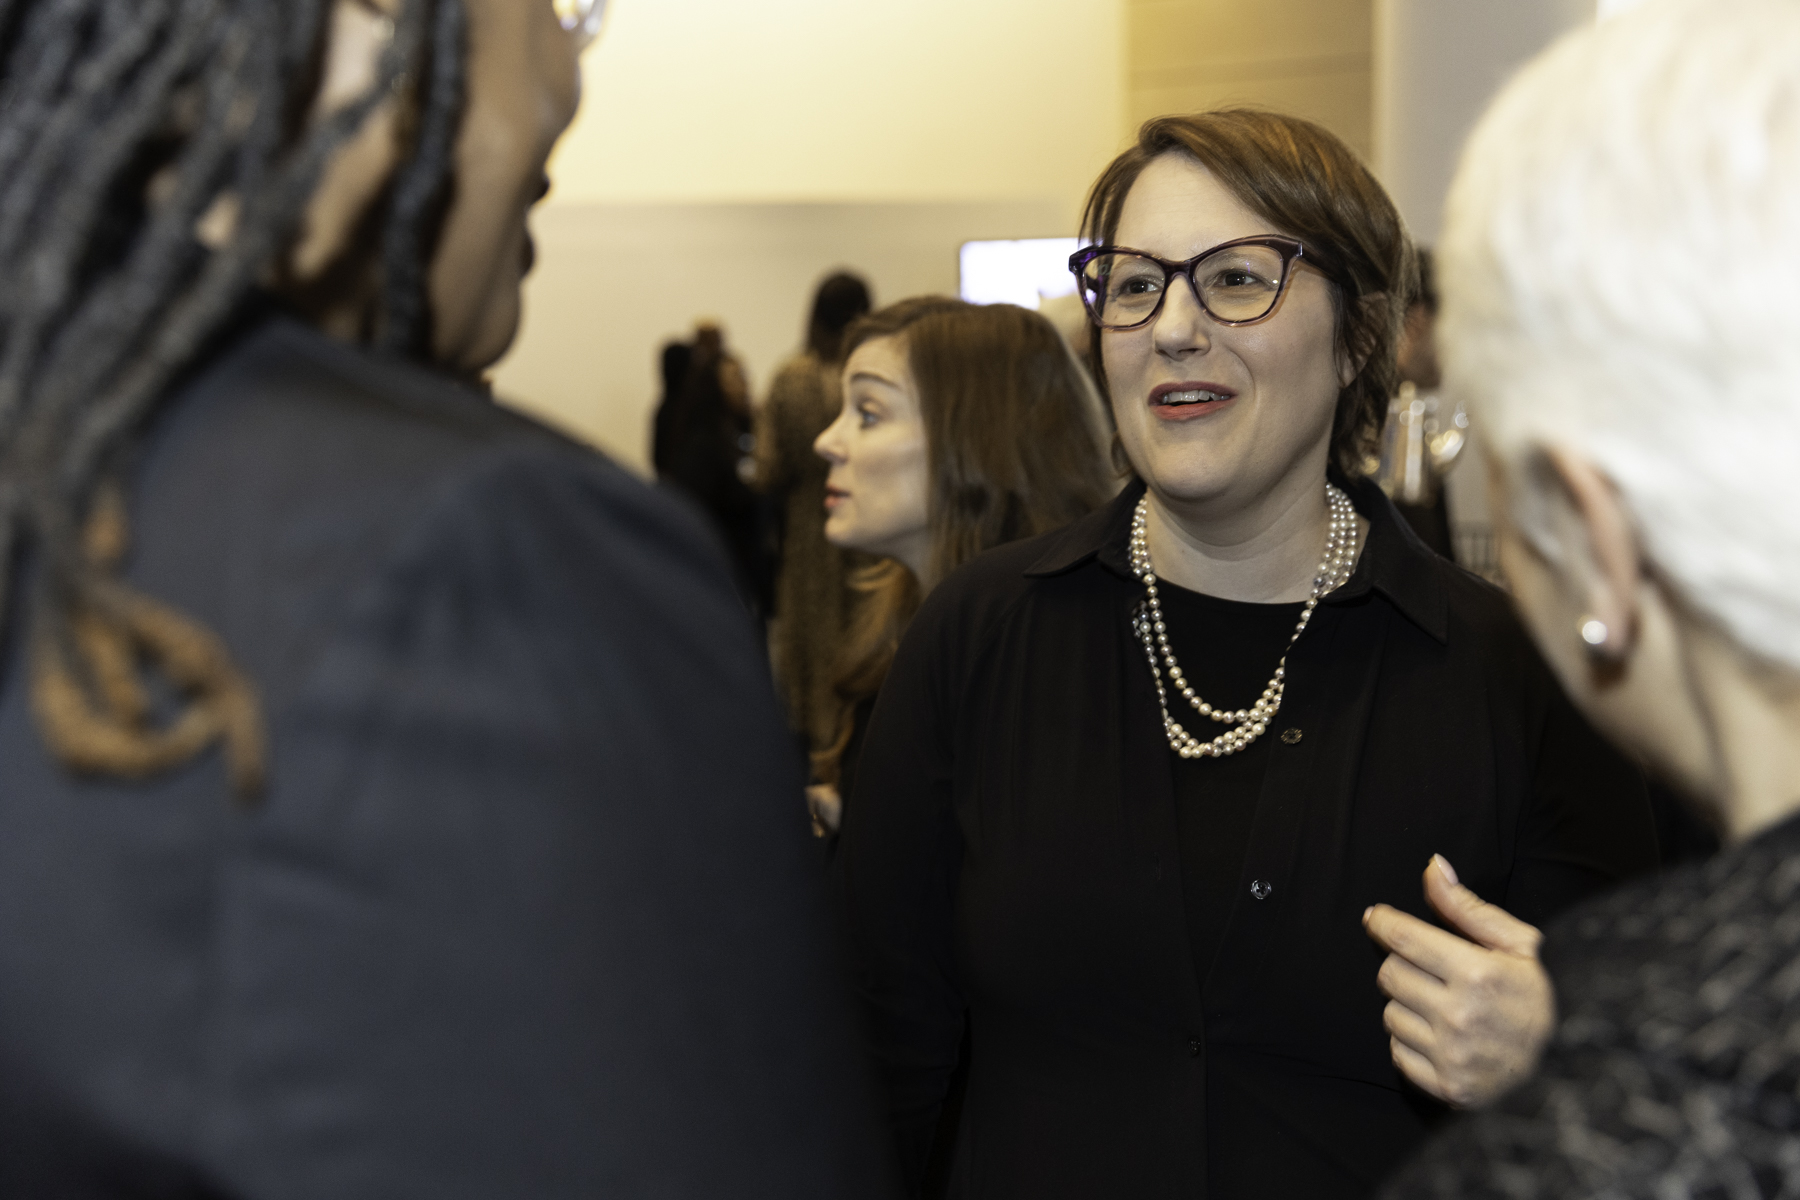 A woman in glasses and a black outfit with a pearl necklace is conversing with others at a social gathering.